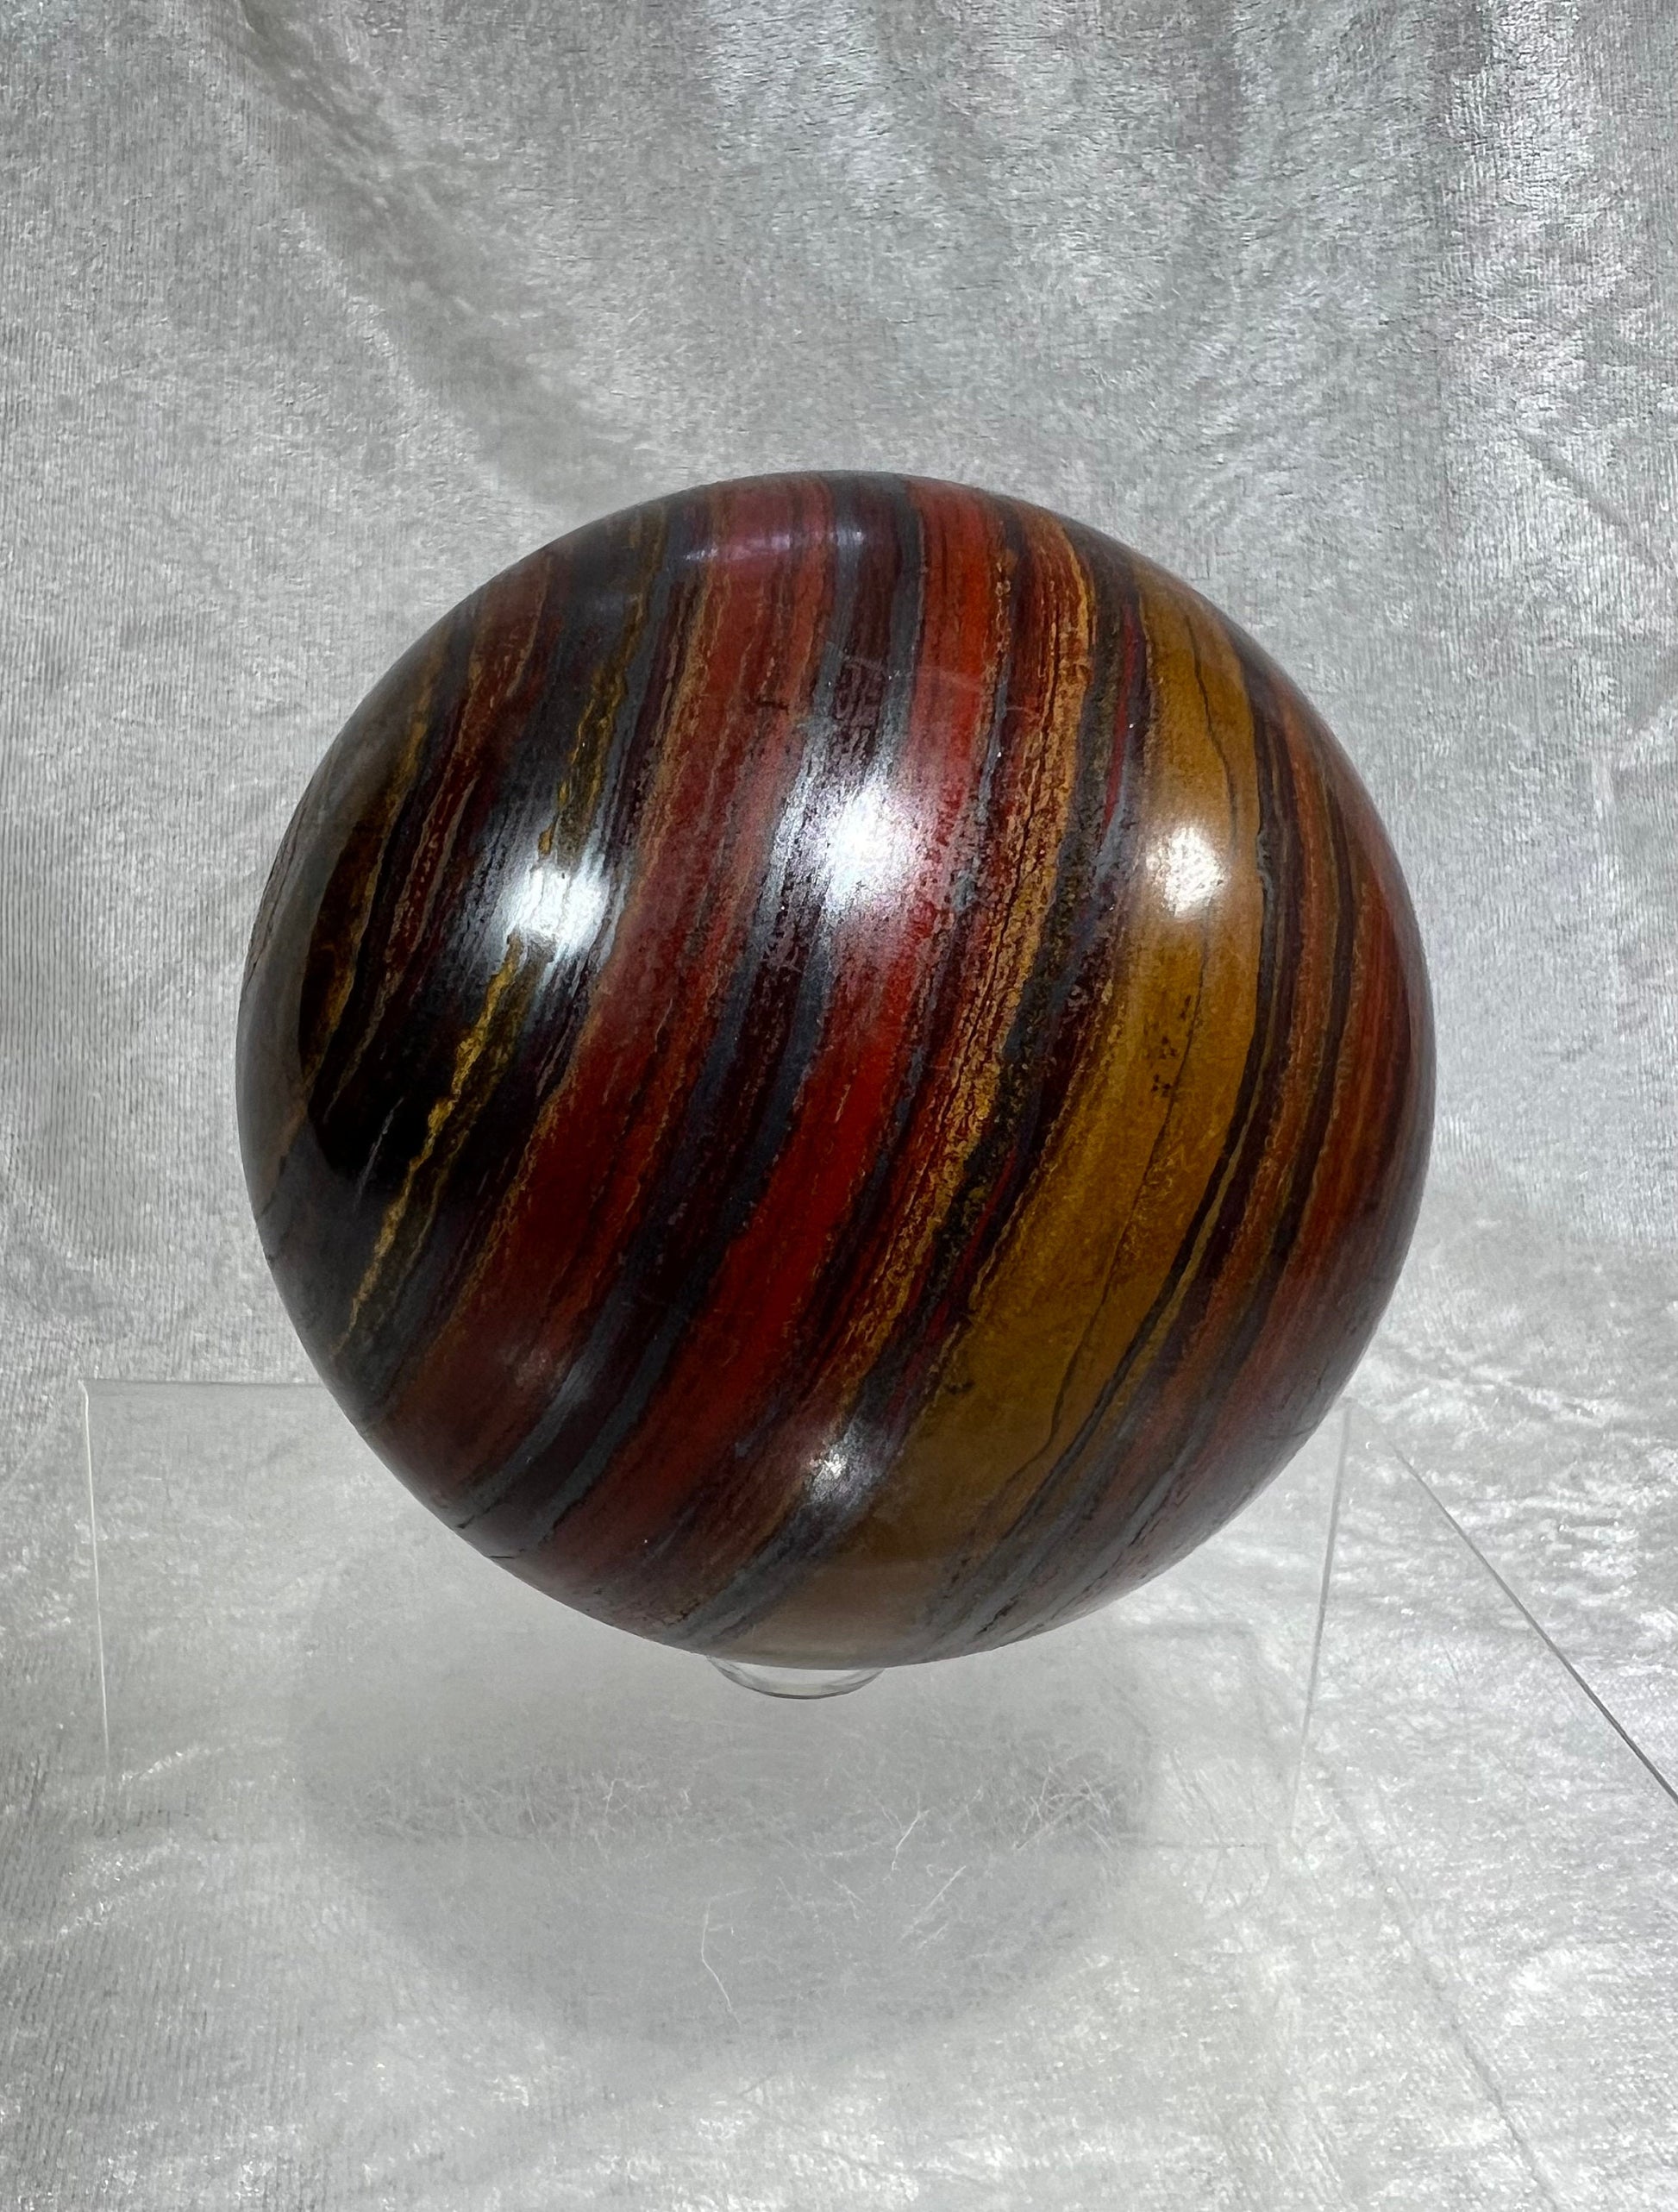 Rare XL Tiger Iron Crystal Sphere. 92mm, 2.9 lbs. Hand Selected High Quality. Amazing Hematite Flash!